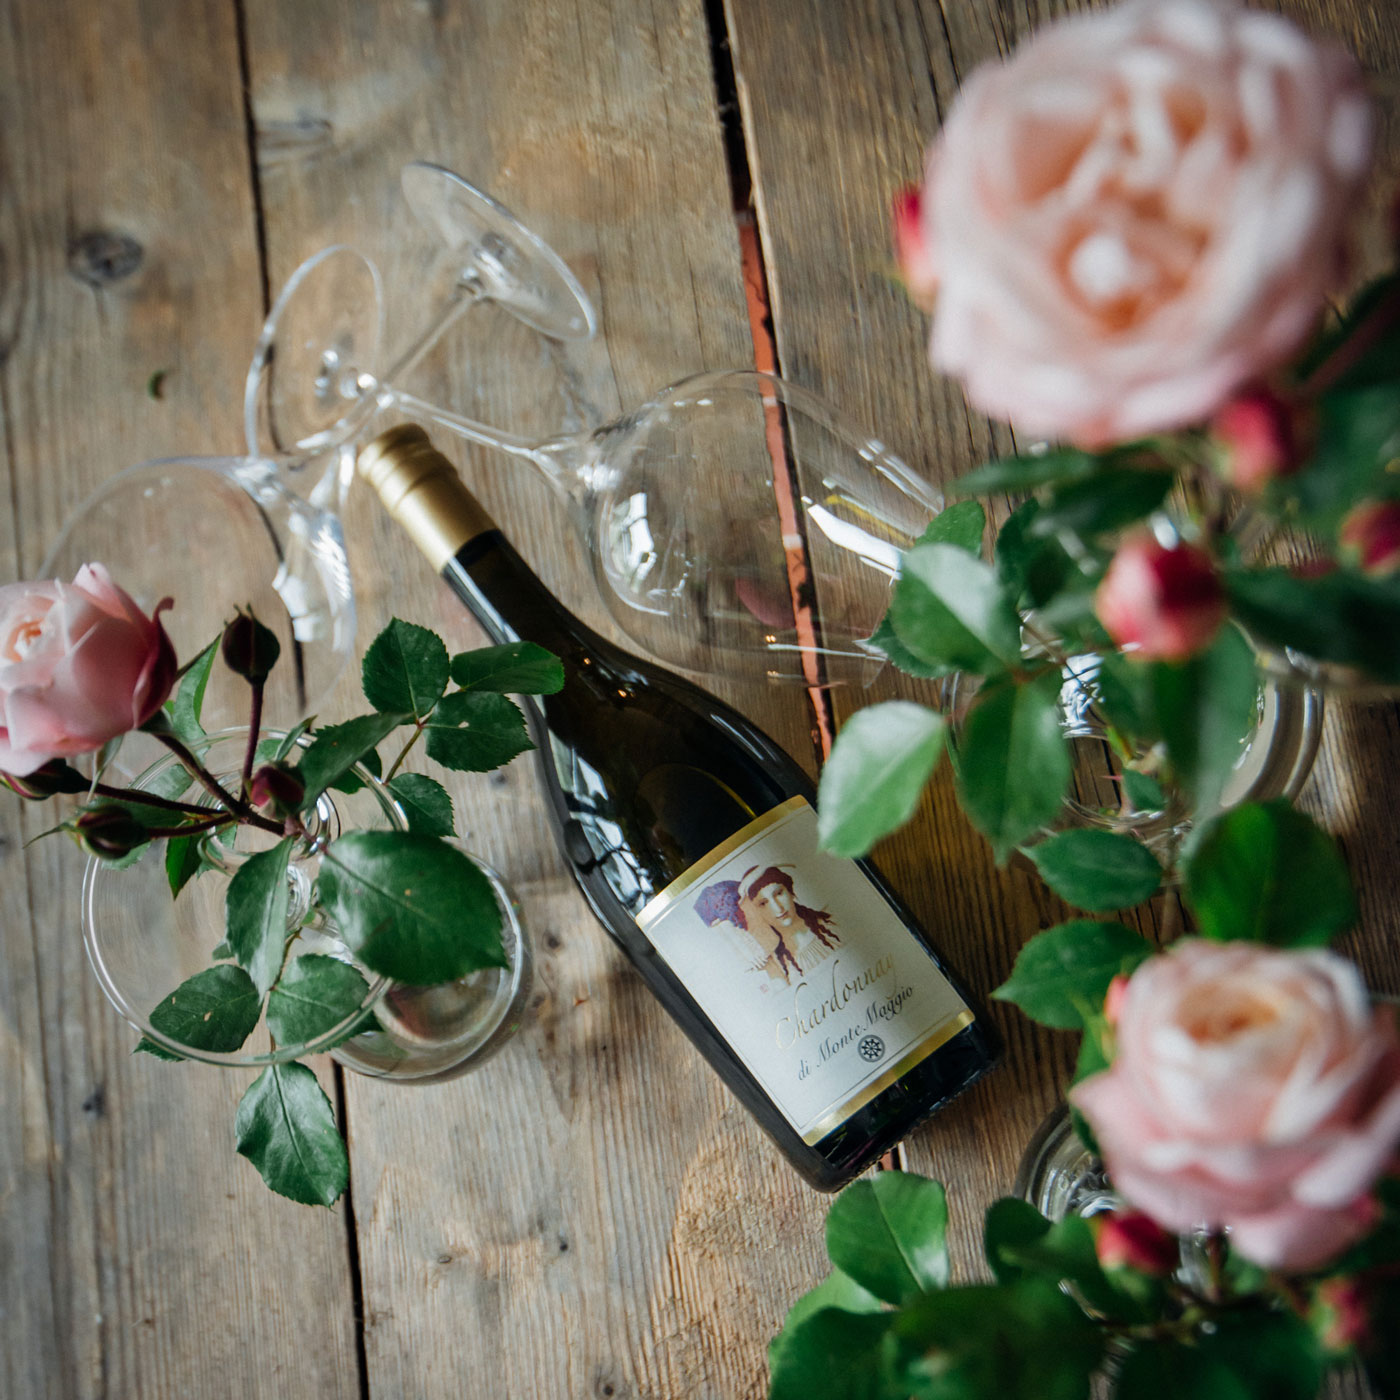 Accompany this Chardonnay with first courses, white meat or fish based courses